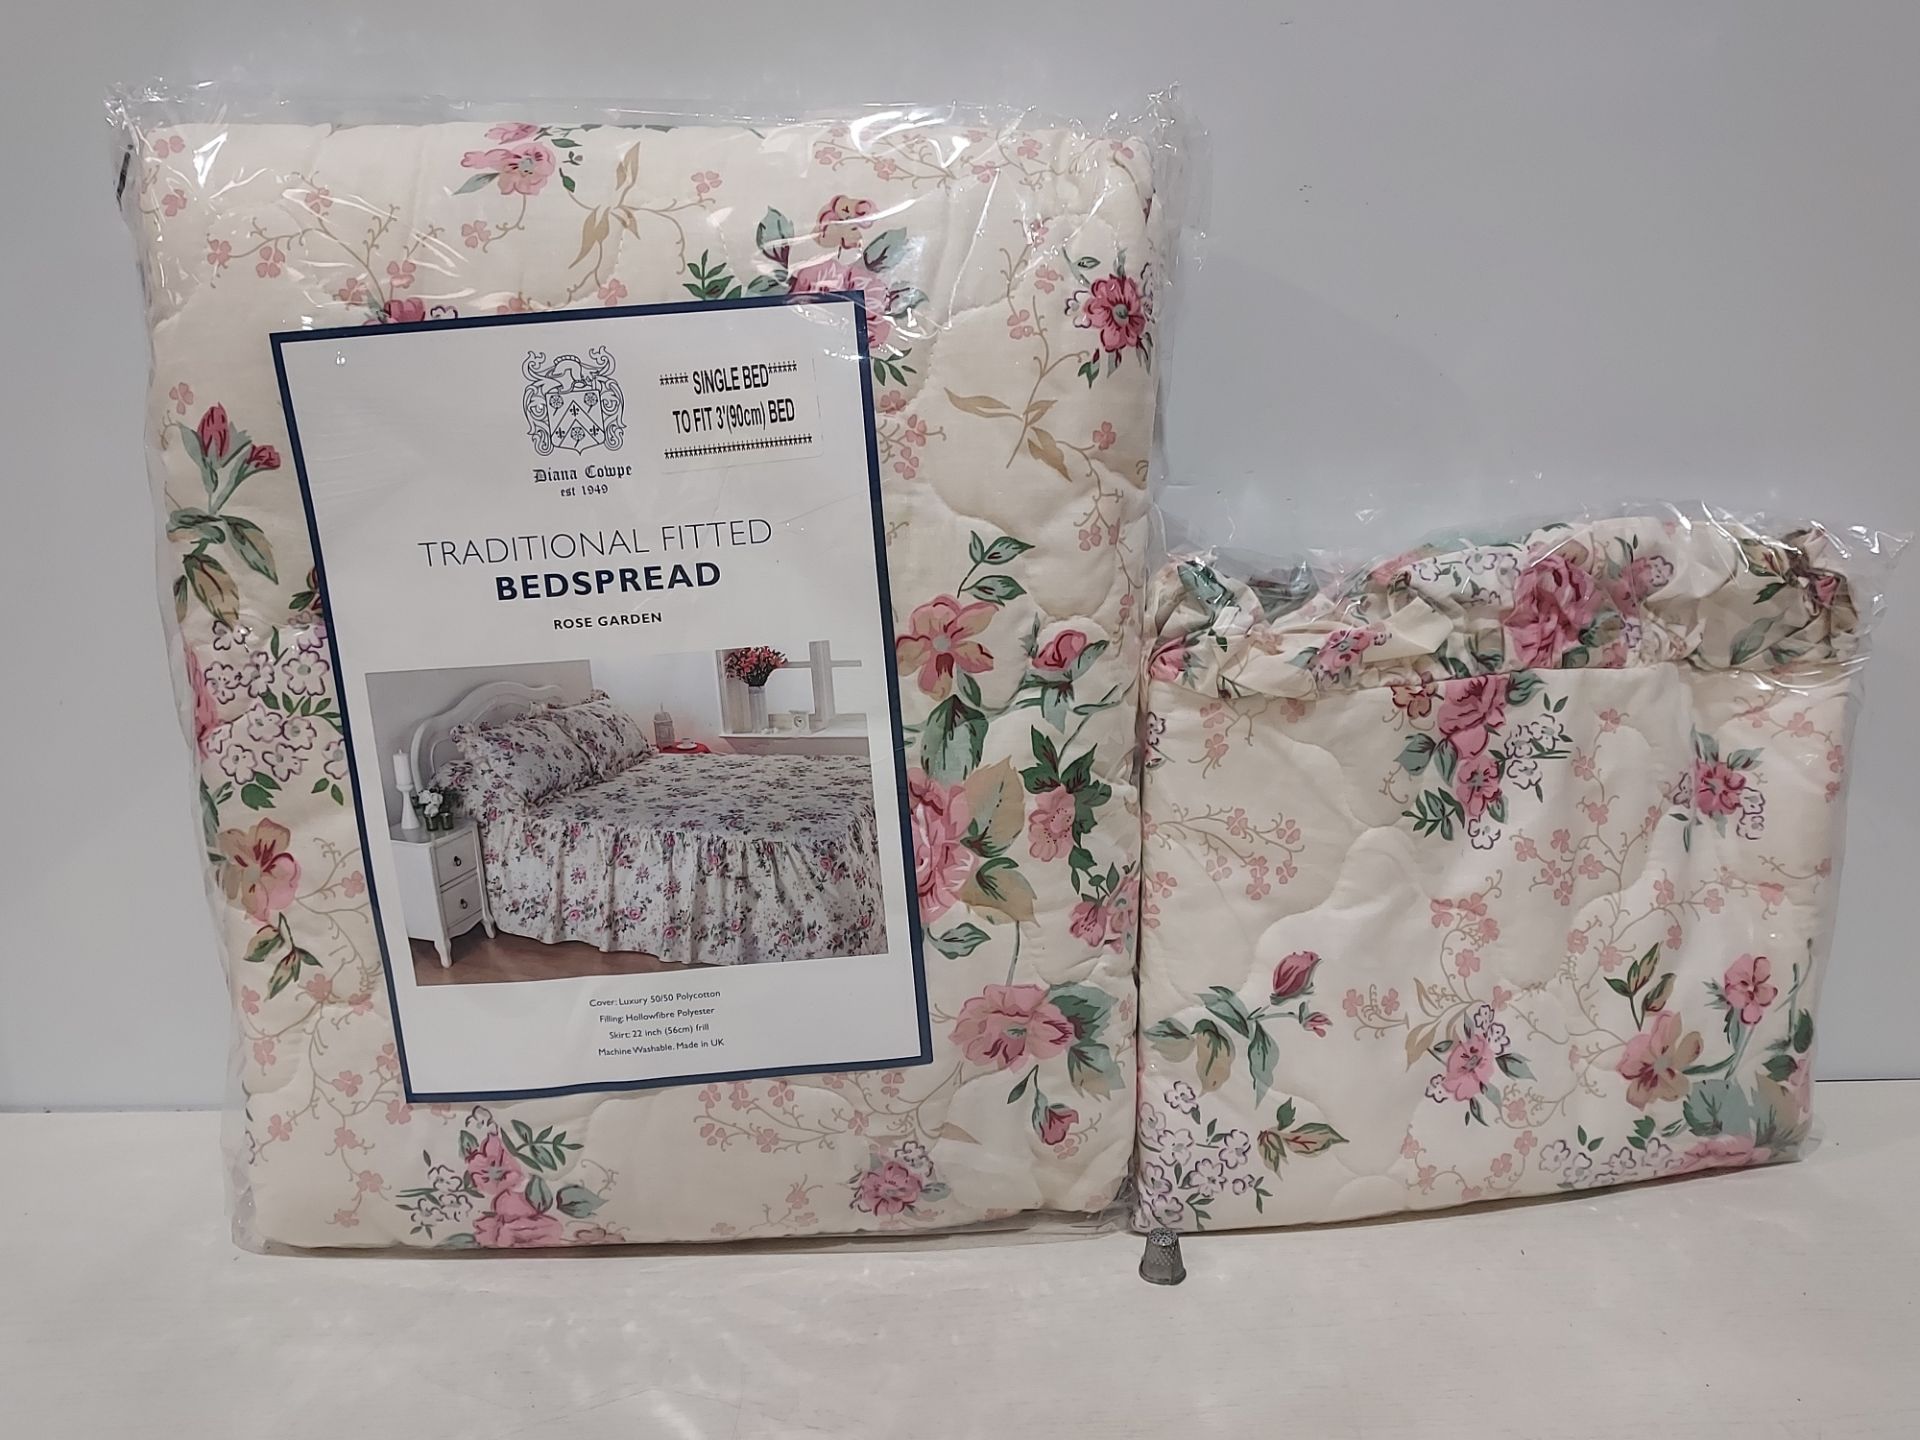 30 X BRAND NEW DIANA COMPE TRADITIONAL FIT BEDSPREAD IN ROSE GARDEN STYLE FOR SINGLE BED TO